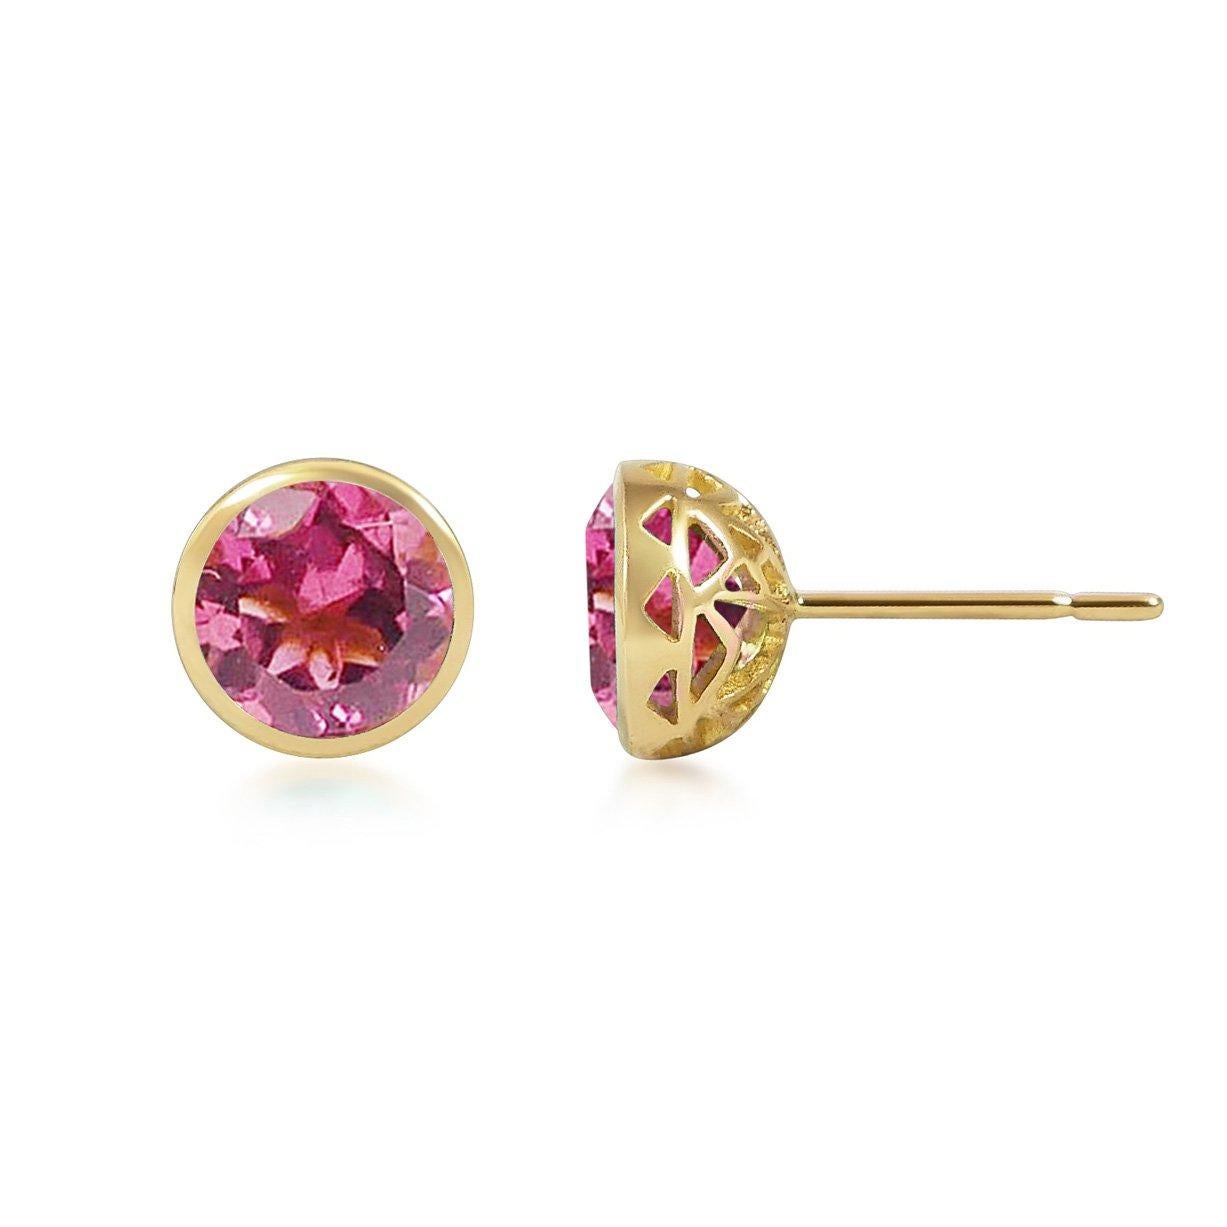 Handcrafted 2.60 Carats Pink Tourmaline 18 Karat Yellow Gold Stud Earrings. The 8mm natural stones are set in our iconic hand pierced gold lace to let the light through our precious and fine stones our earrings are the perfect everyday